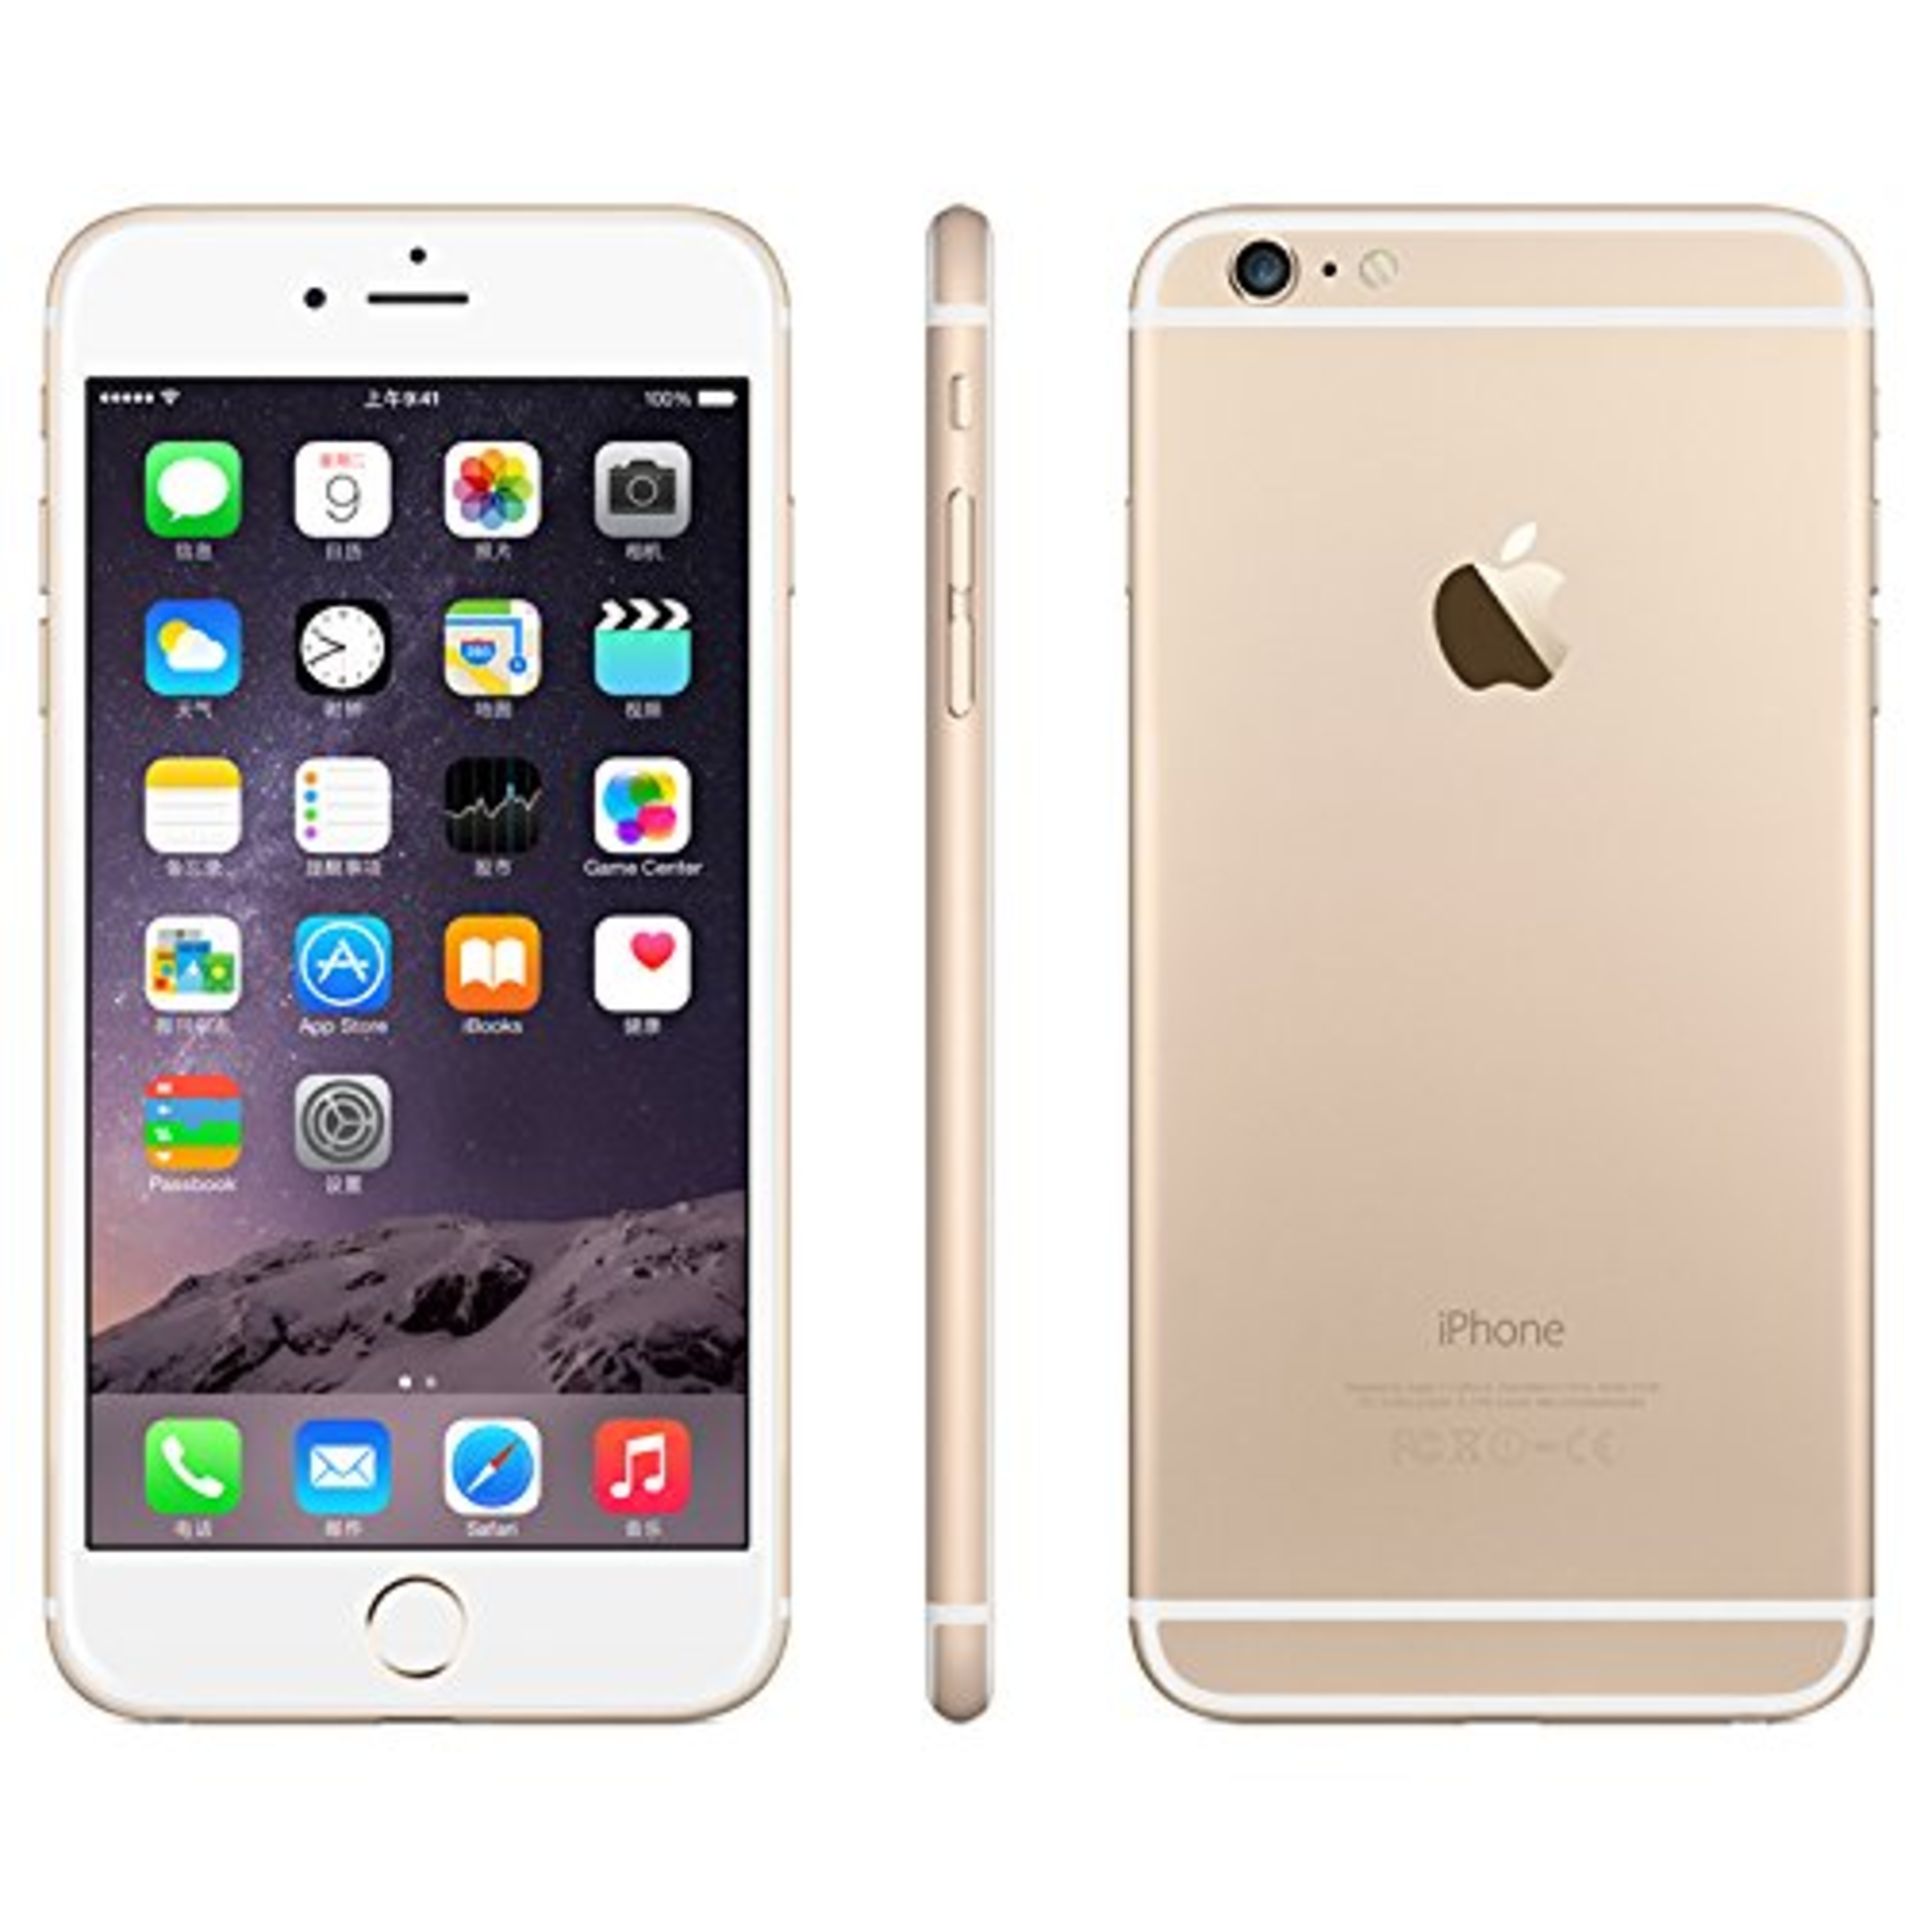 Grade A Apple iphone 6 plus 16GB Colours May Vary Touch ID Non Functional Item available approx 12